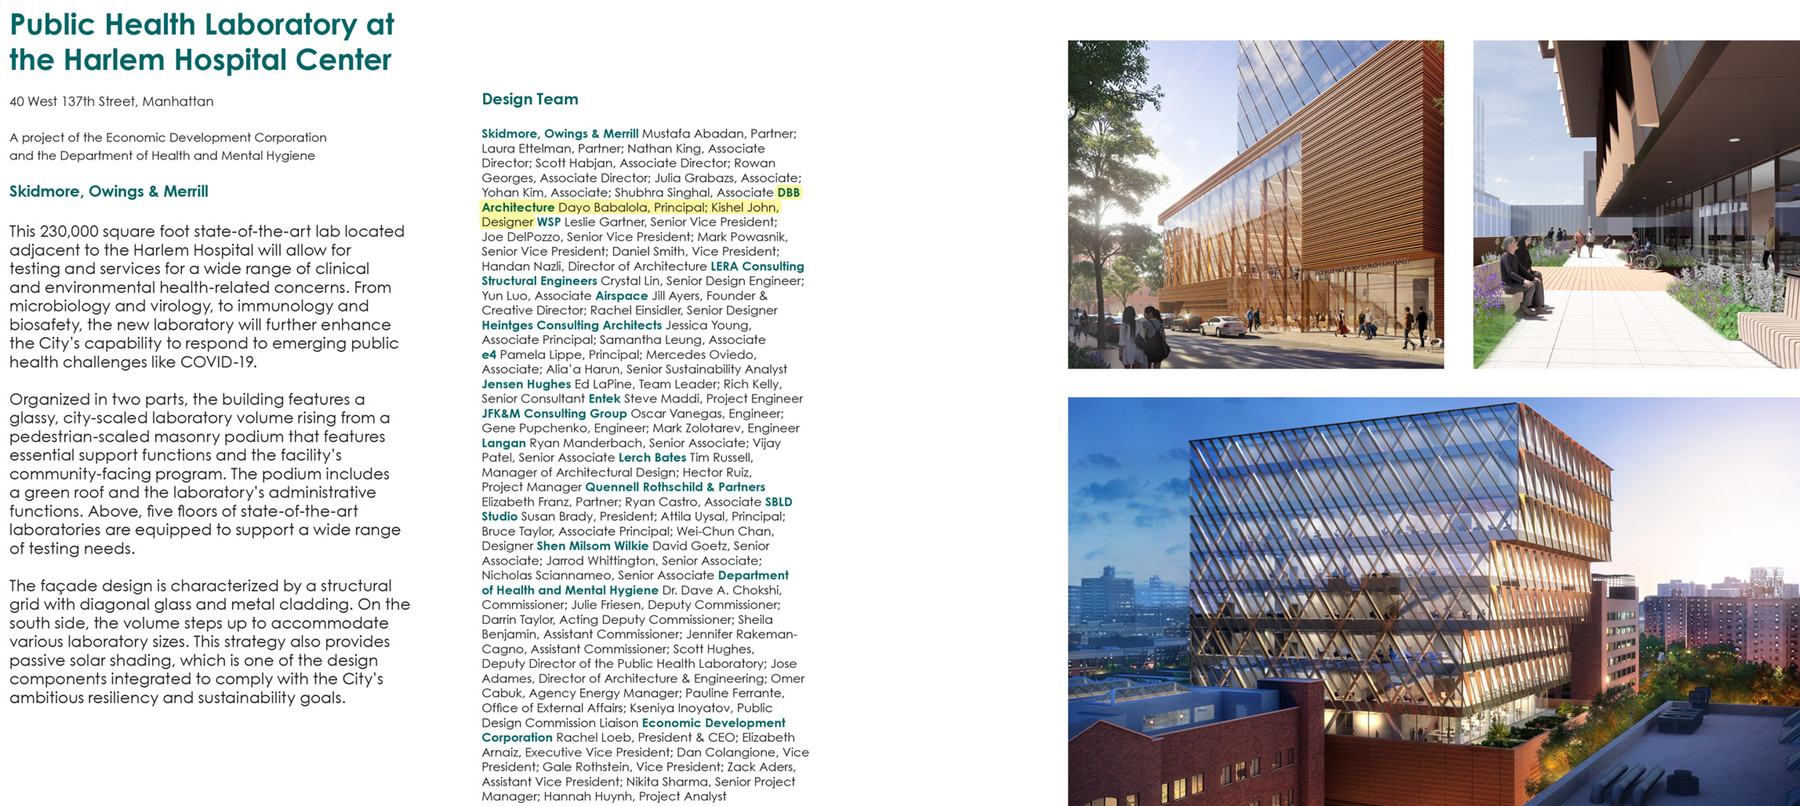 NYC PDC Award Public Design Commission 39th Annual Awards Publication, 2021